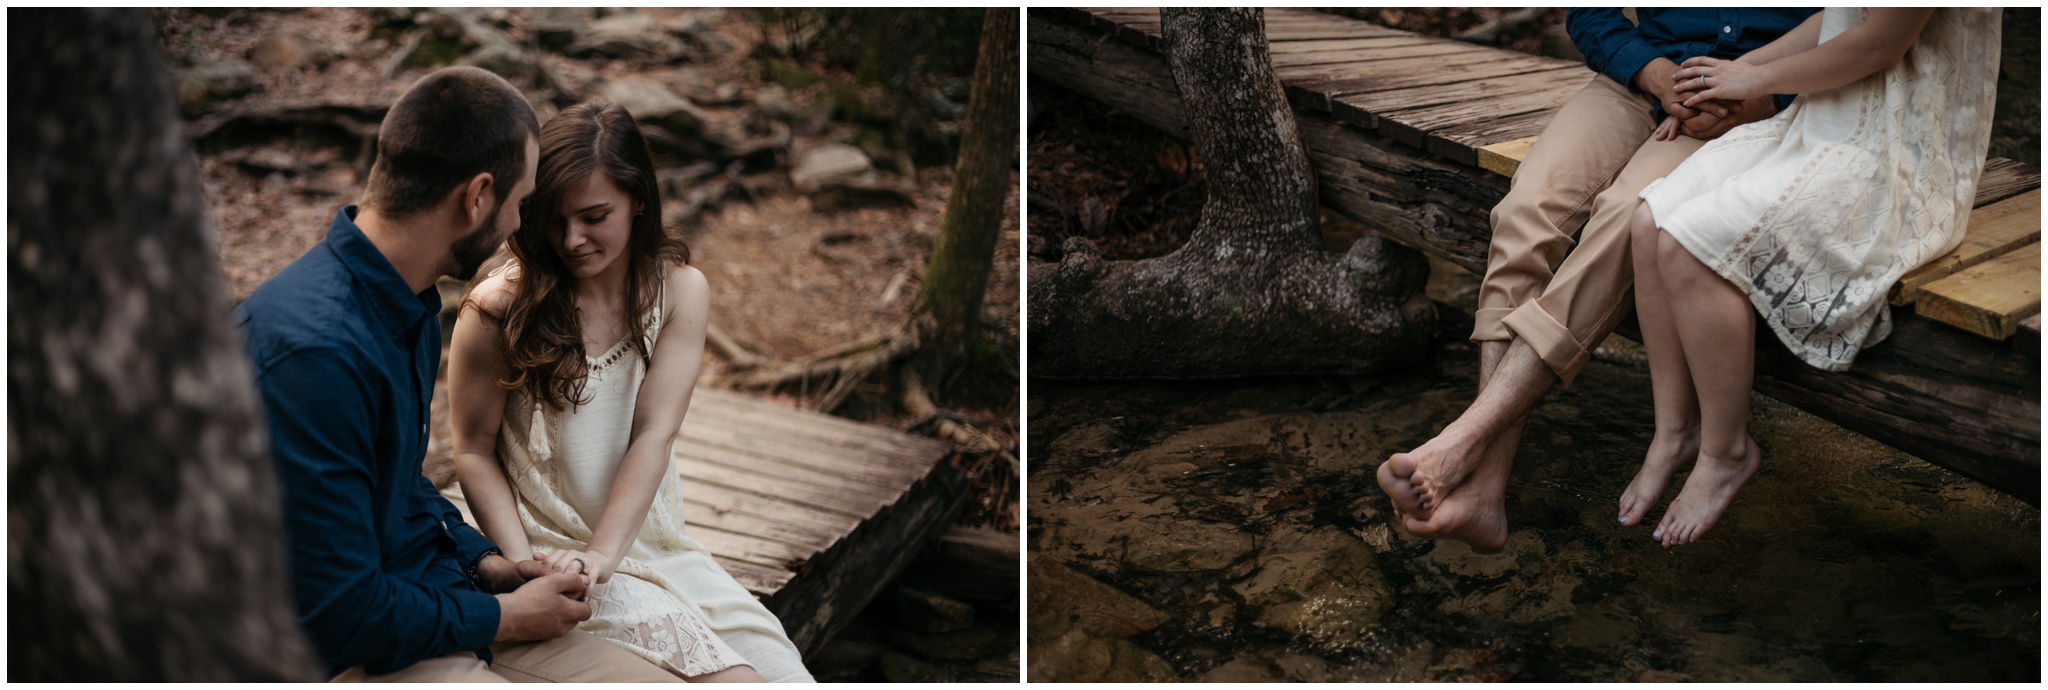 The Morros Photography Maddie and Jake Engagament session at Oak Mountain State Park Alabama_0074.jpg